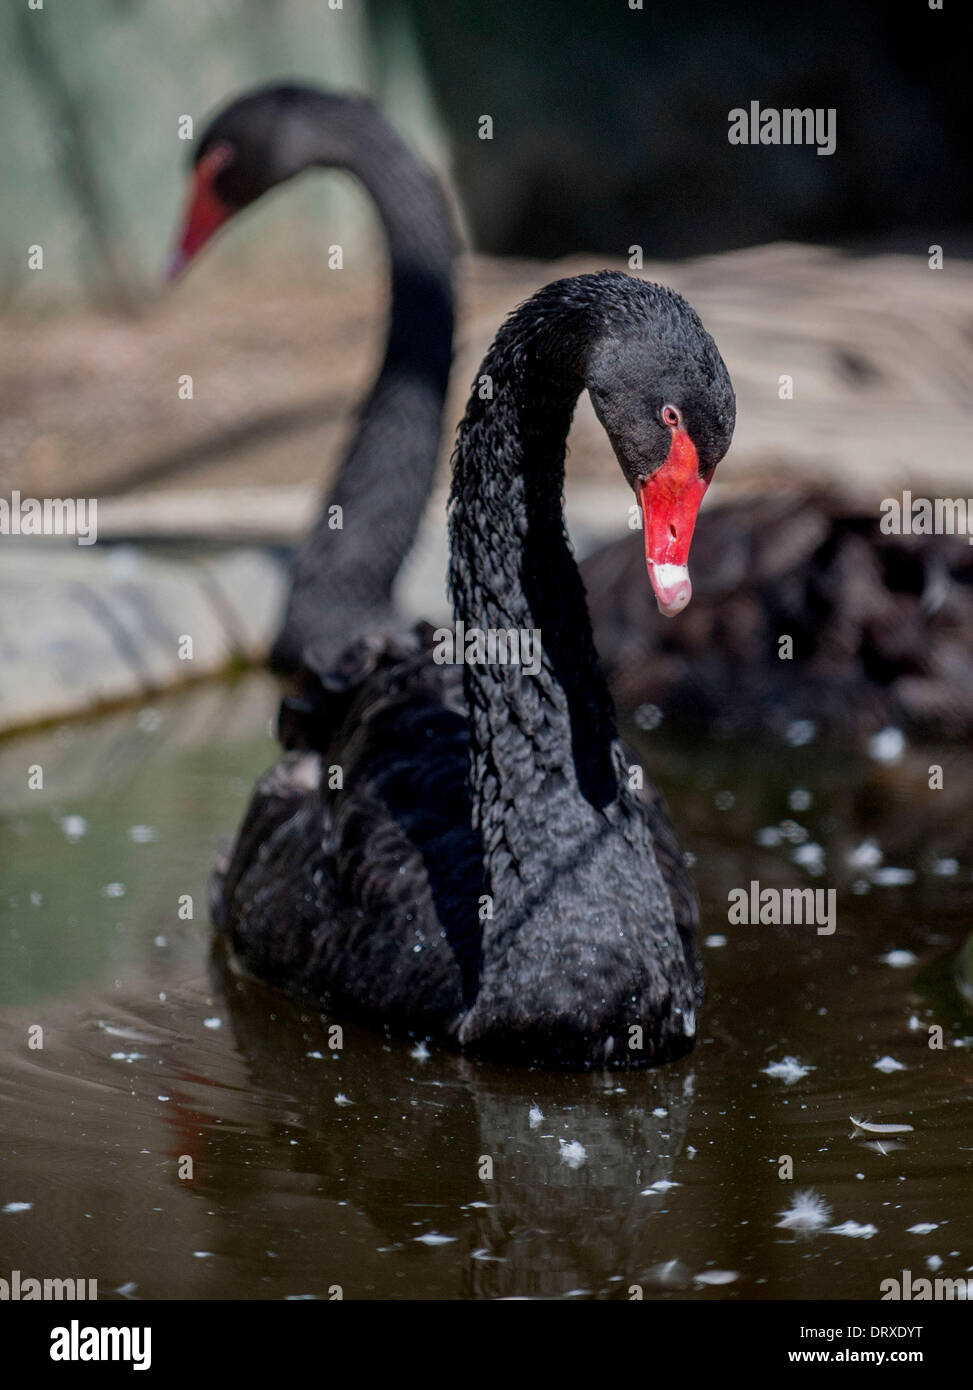 Calcutta, India's West Bengal State. 3rd Feb, 2014. Black swans swim in a lake at the Alipur zoo in Calcutta, capital of east India's West Bengal State, Feb. 3, 2014. © Tumpa Mondal/Xinhua/Alamy Live News Stock Photo